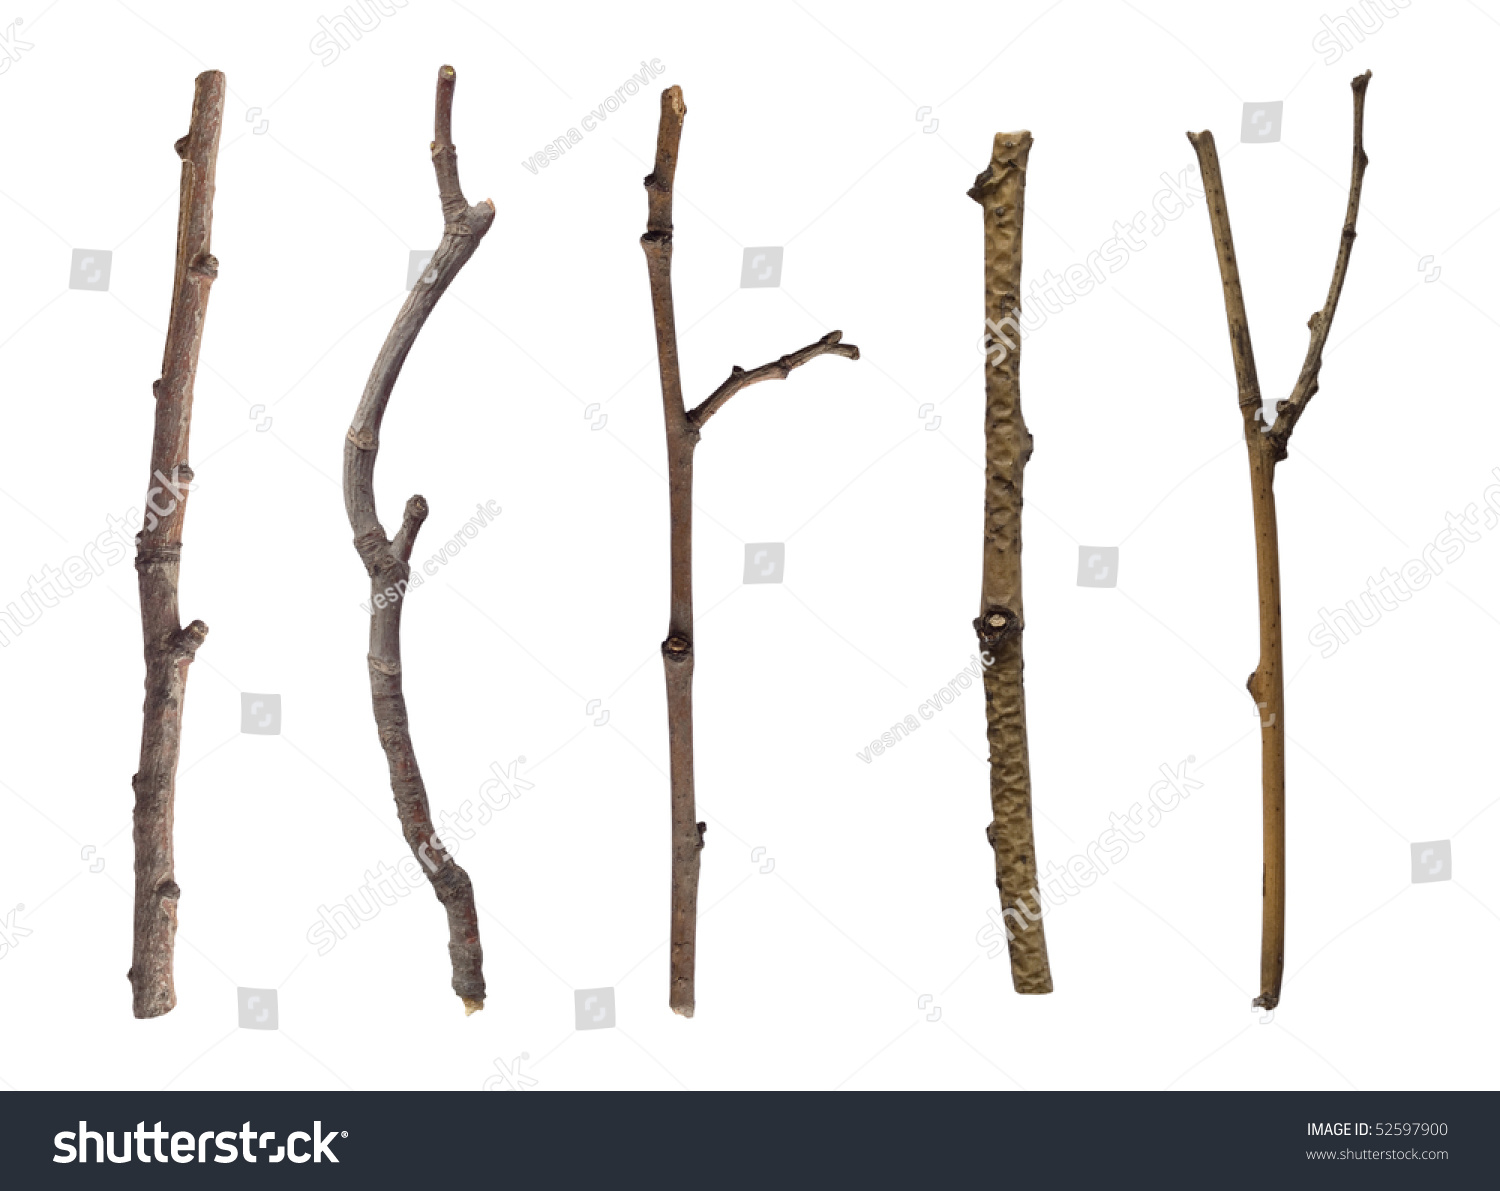 Collection Of Branches Stock Photo 52597900 : Shutterstock